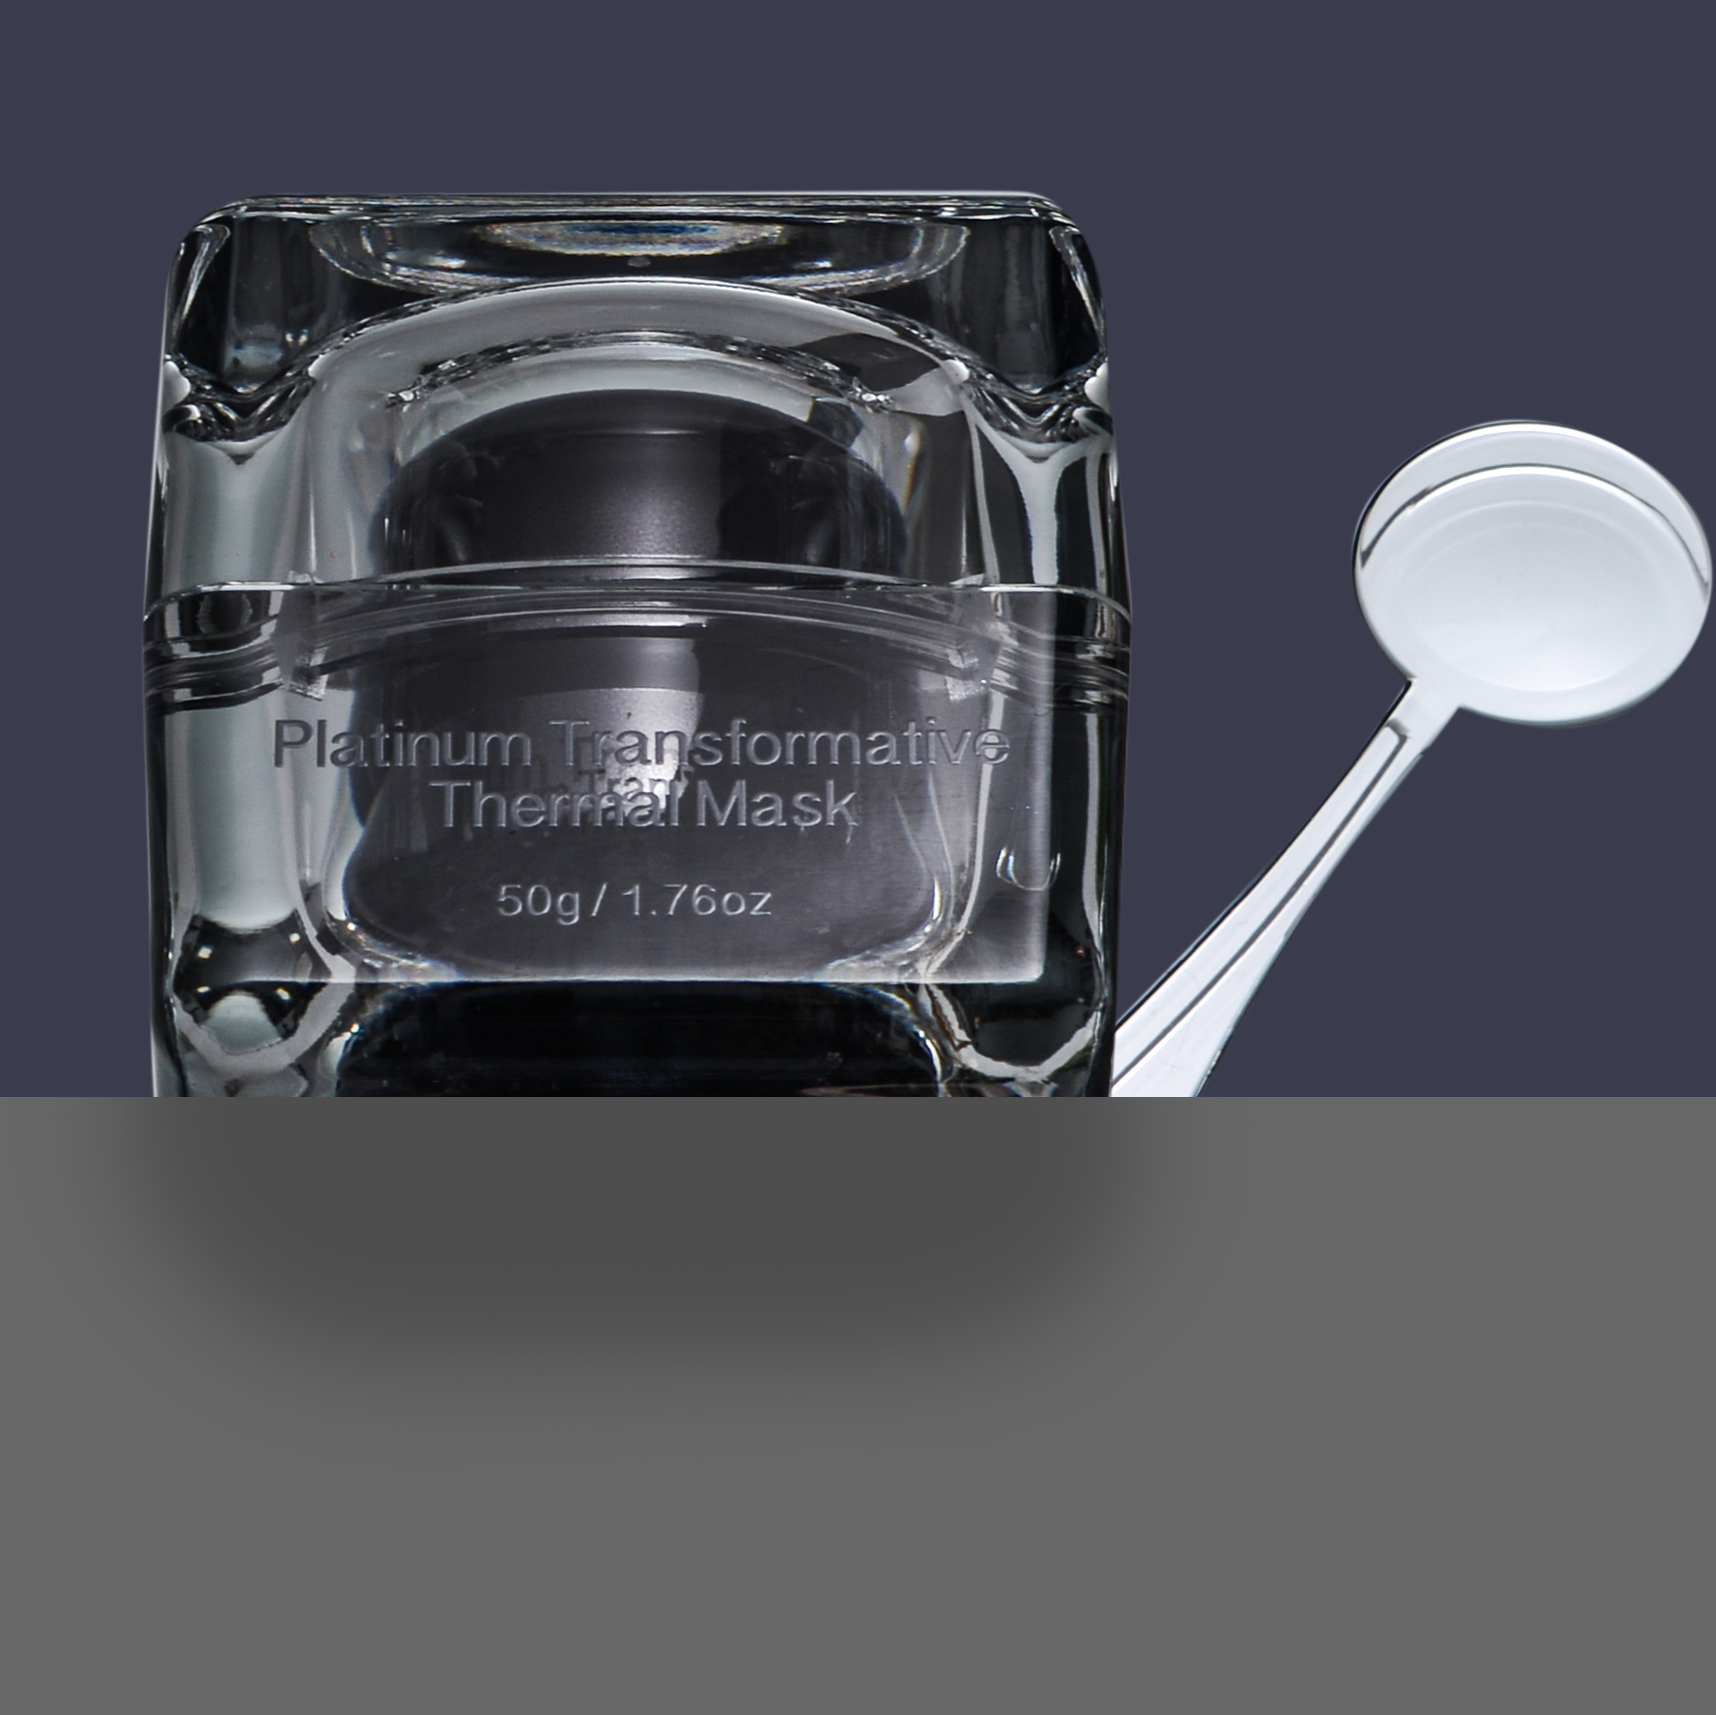 The Bionyx Thermal Mask is one of the best anti-aging products